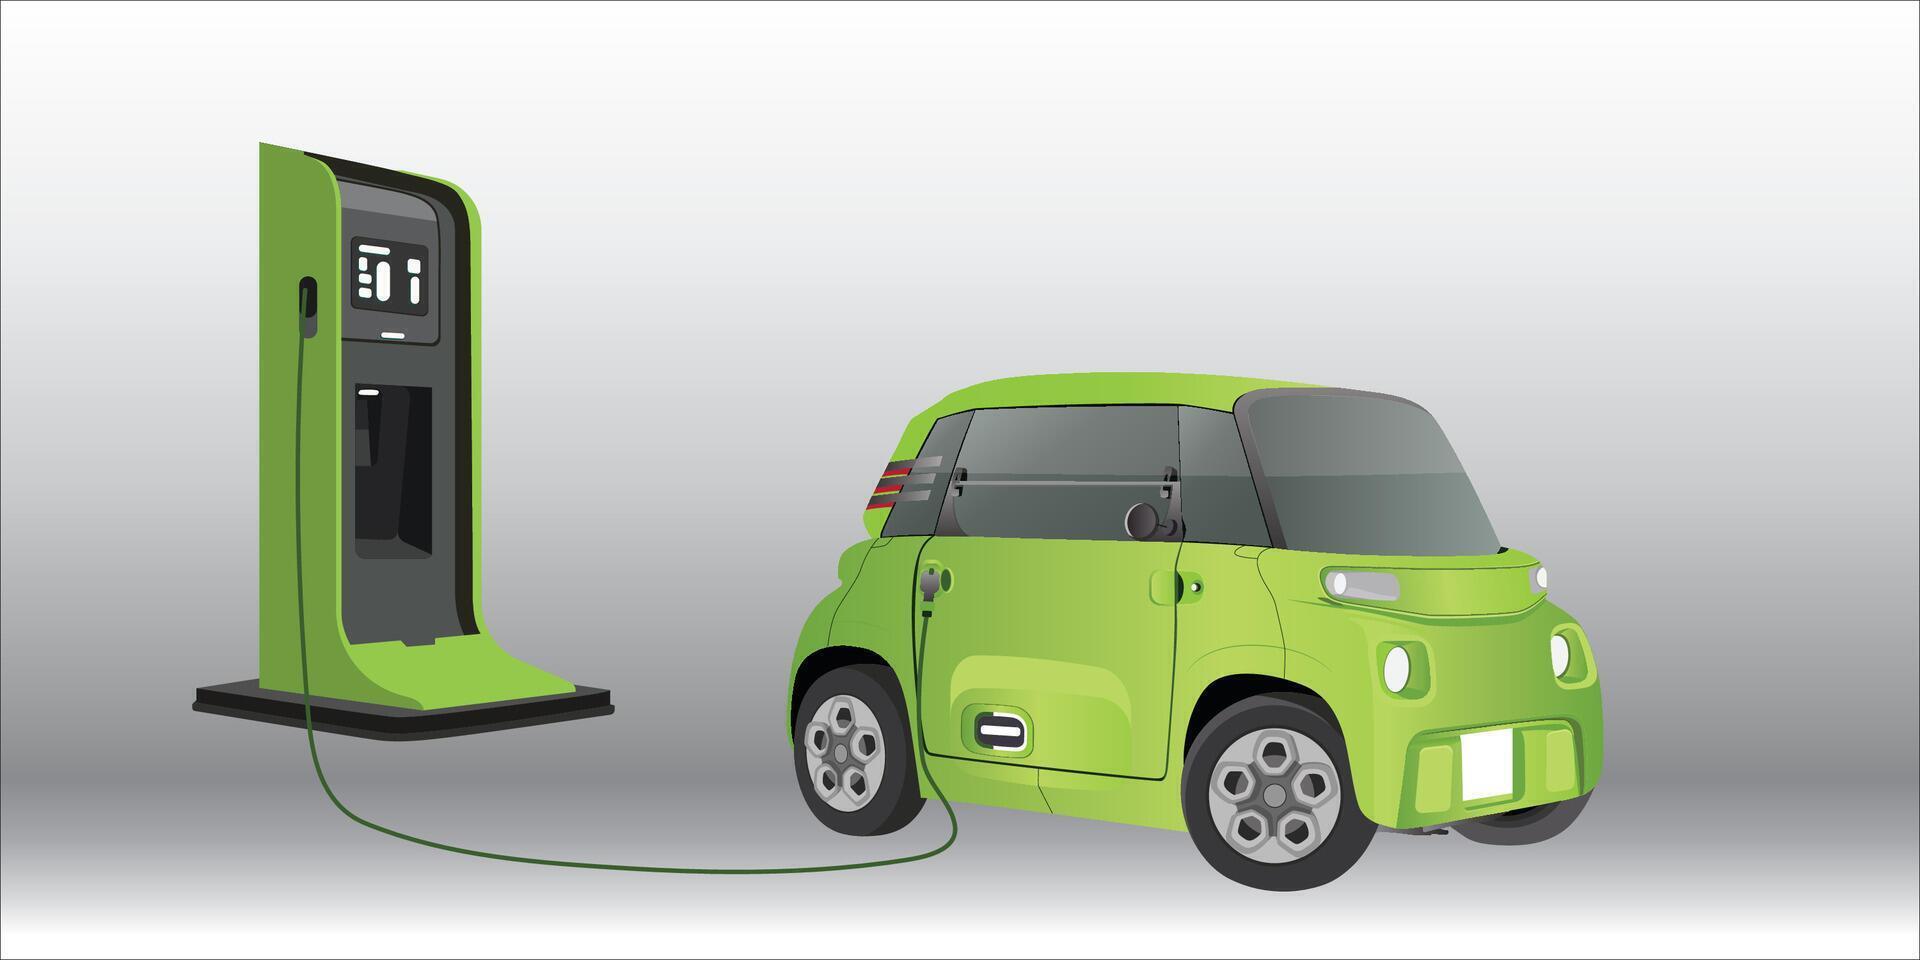 Green electric car at charging station. Vehicle is being charged. EV vehicle battery is plugged in and gets electricity from solar panels renewable power generator, wind turbine. vector